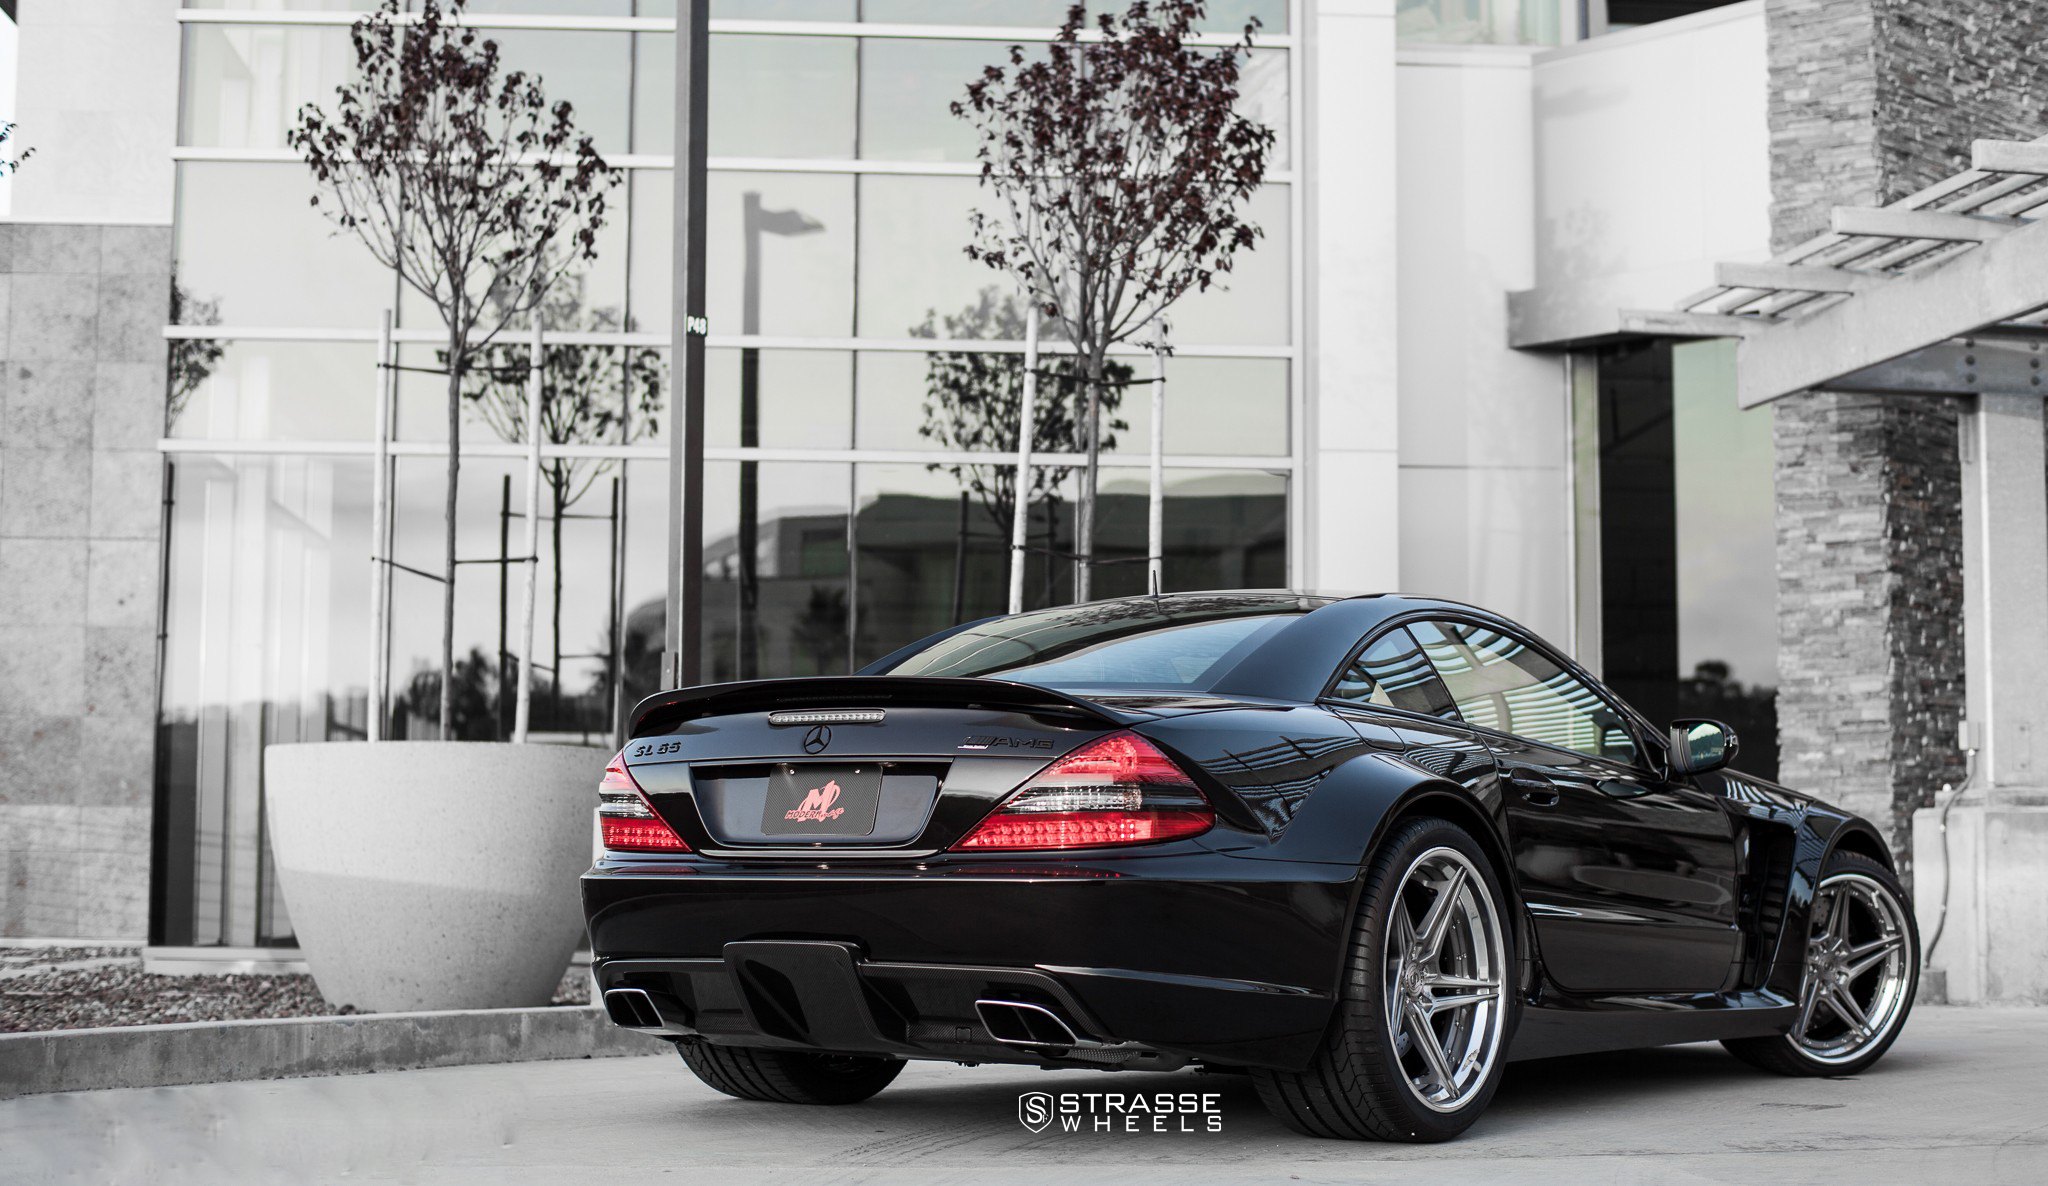 Aftermarket Rear Spoiler on Black Mercedes SL-Class - Photo by Strasse Forged